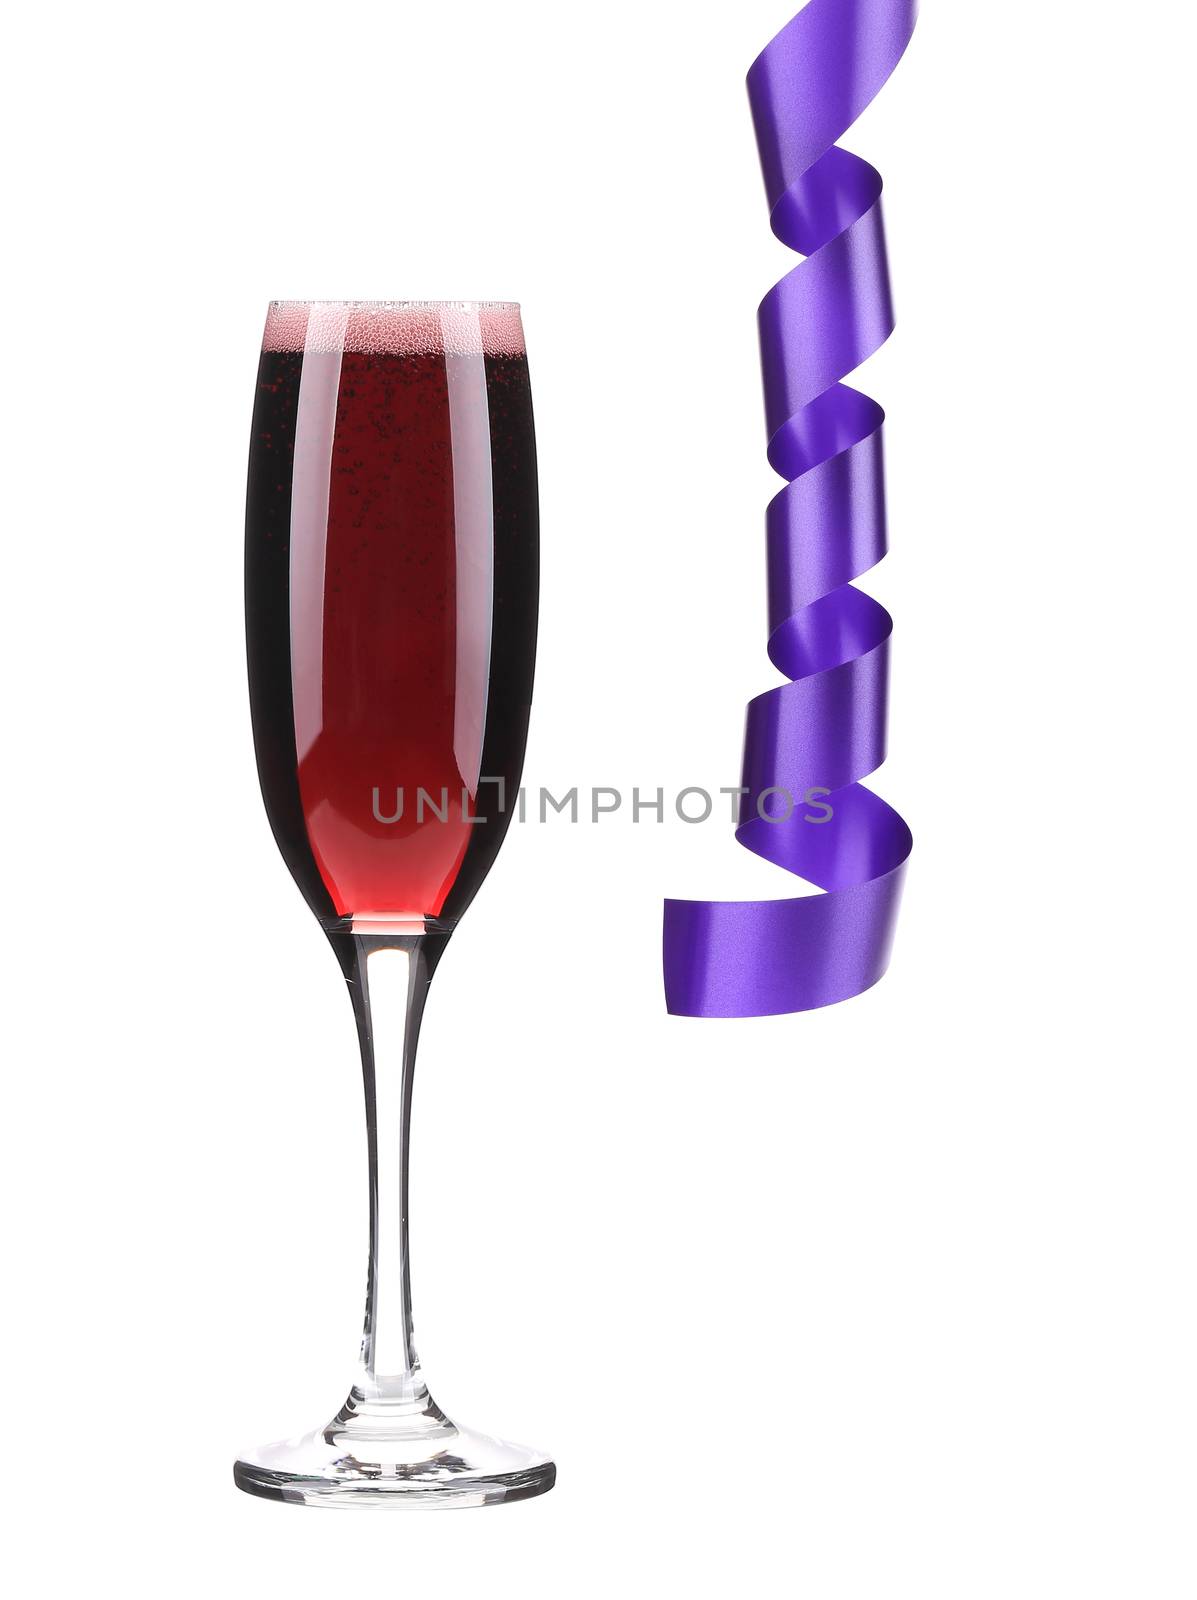 Purple ribbon and champagne glass. by indigolotos